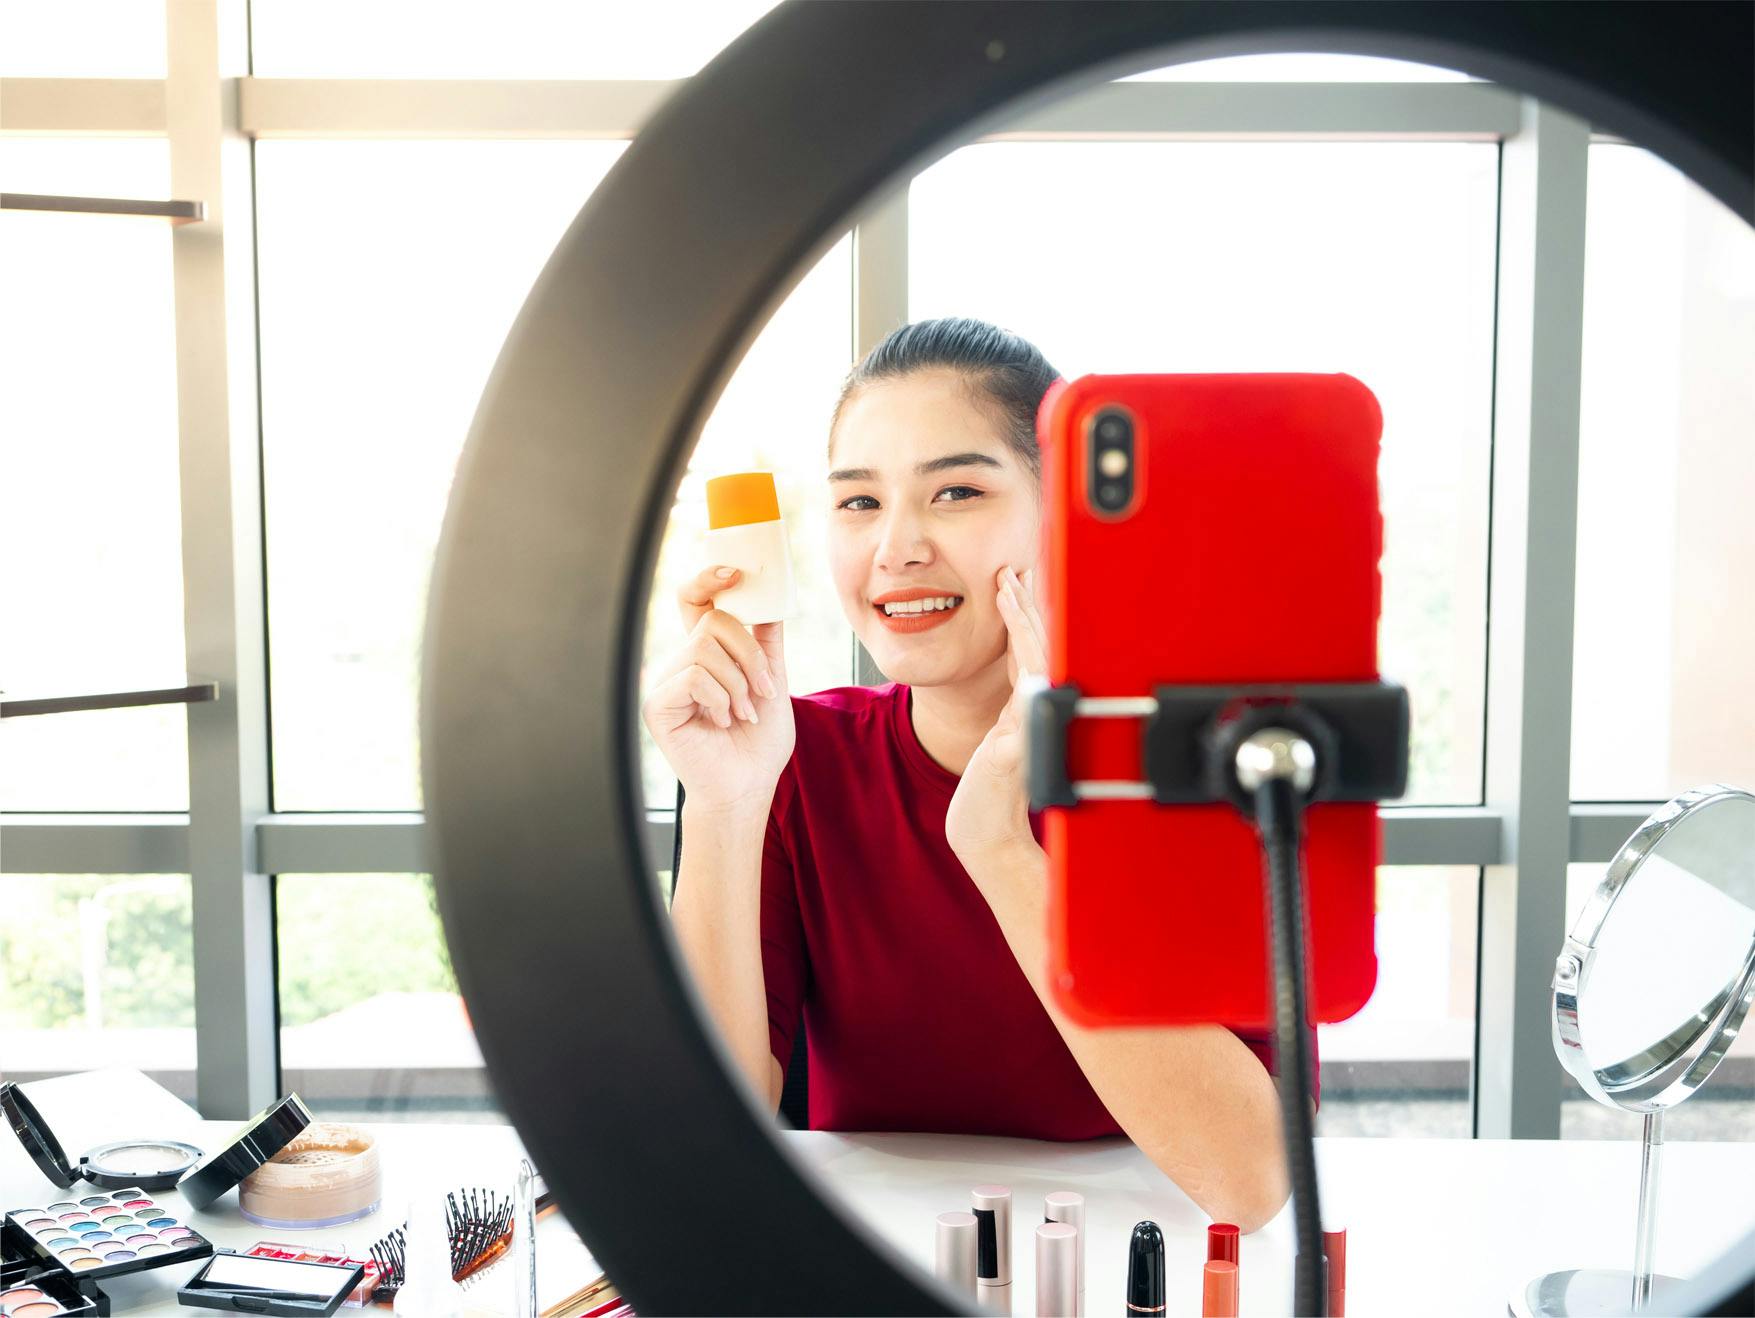 Female beauty influencer demonstrating product on livestream filming on mobile phone with light ring